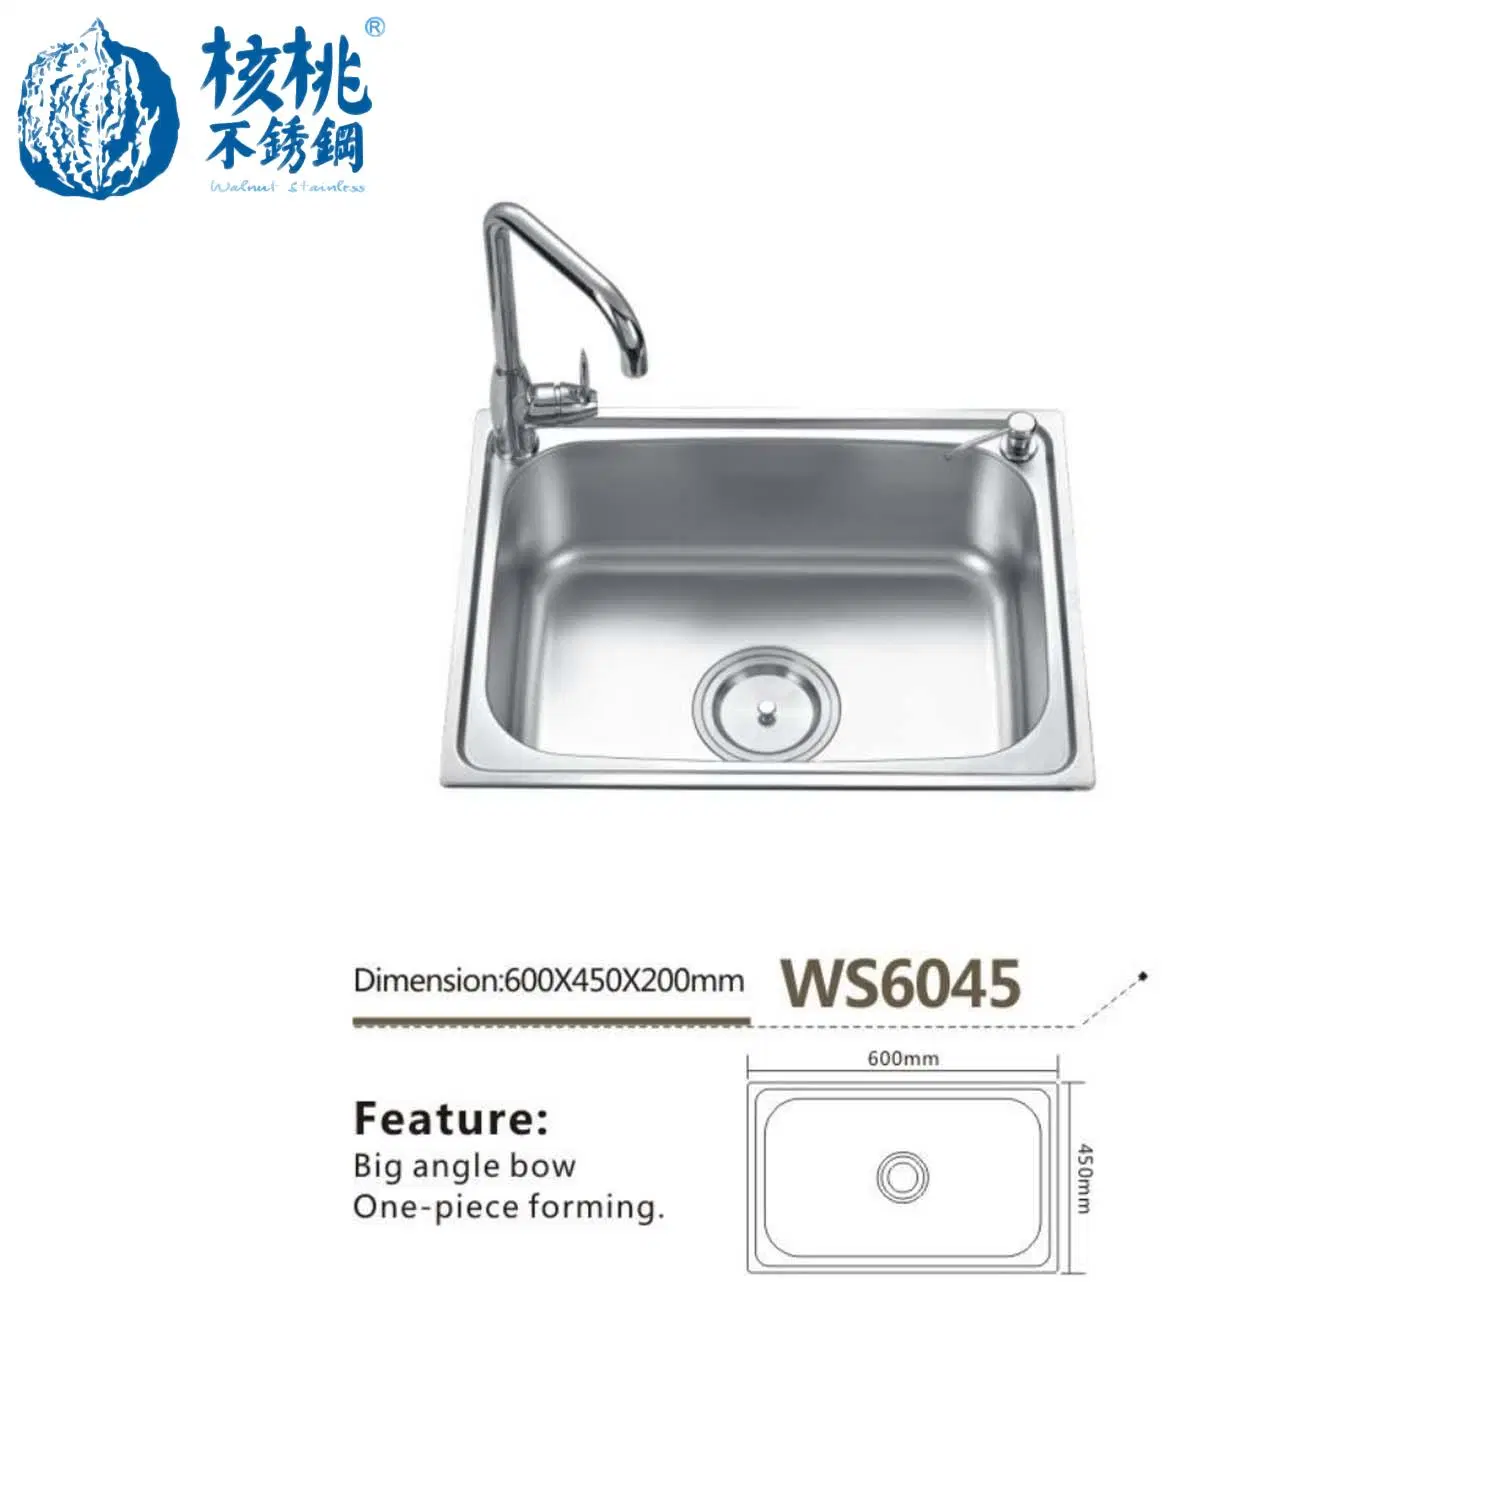 Walnut Kitchen Sink 304 Stainless Steel Silver Nano Large Single Slot Thicken Vegatable Basin with Drain Accessories Undermount